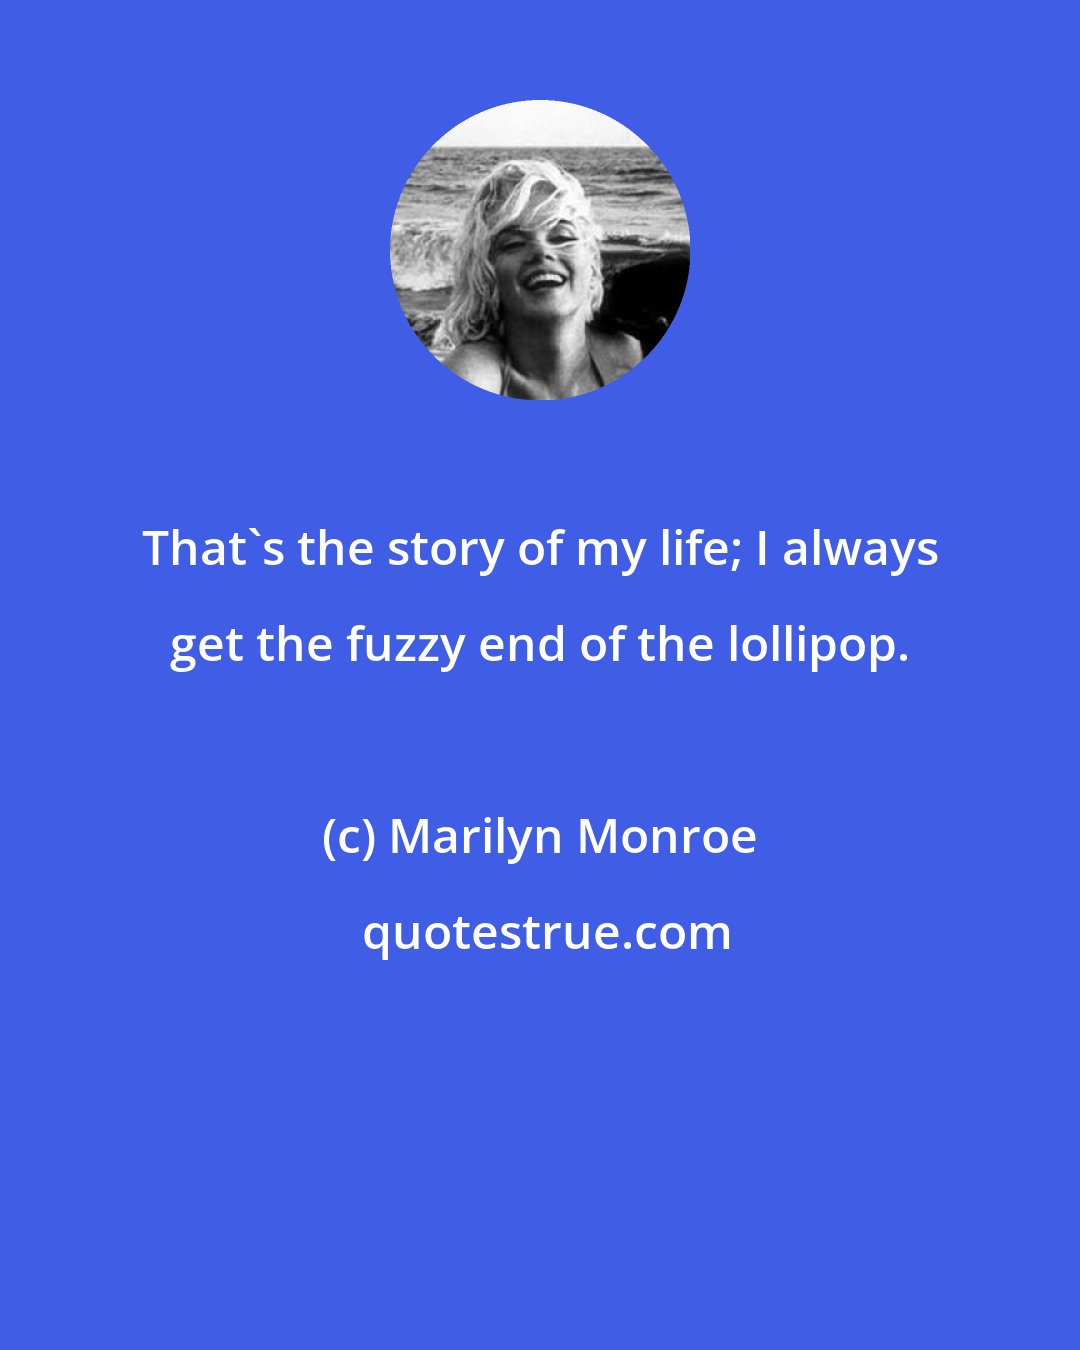 Marilyn Monroe: That's the story of my life; I always get the fuzzy end of the lollipop.